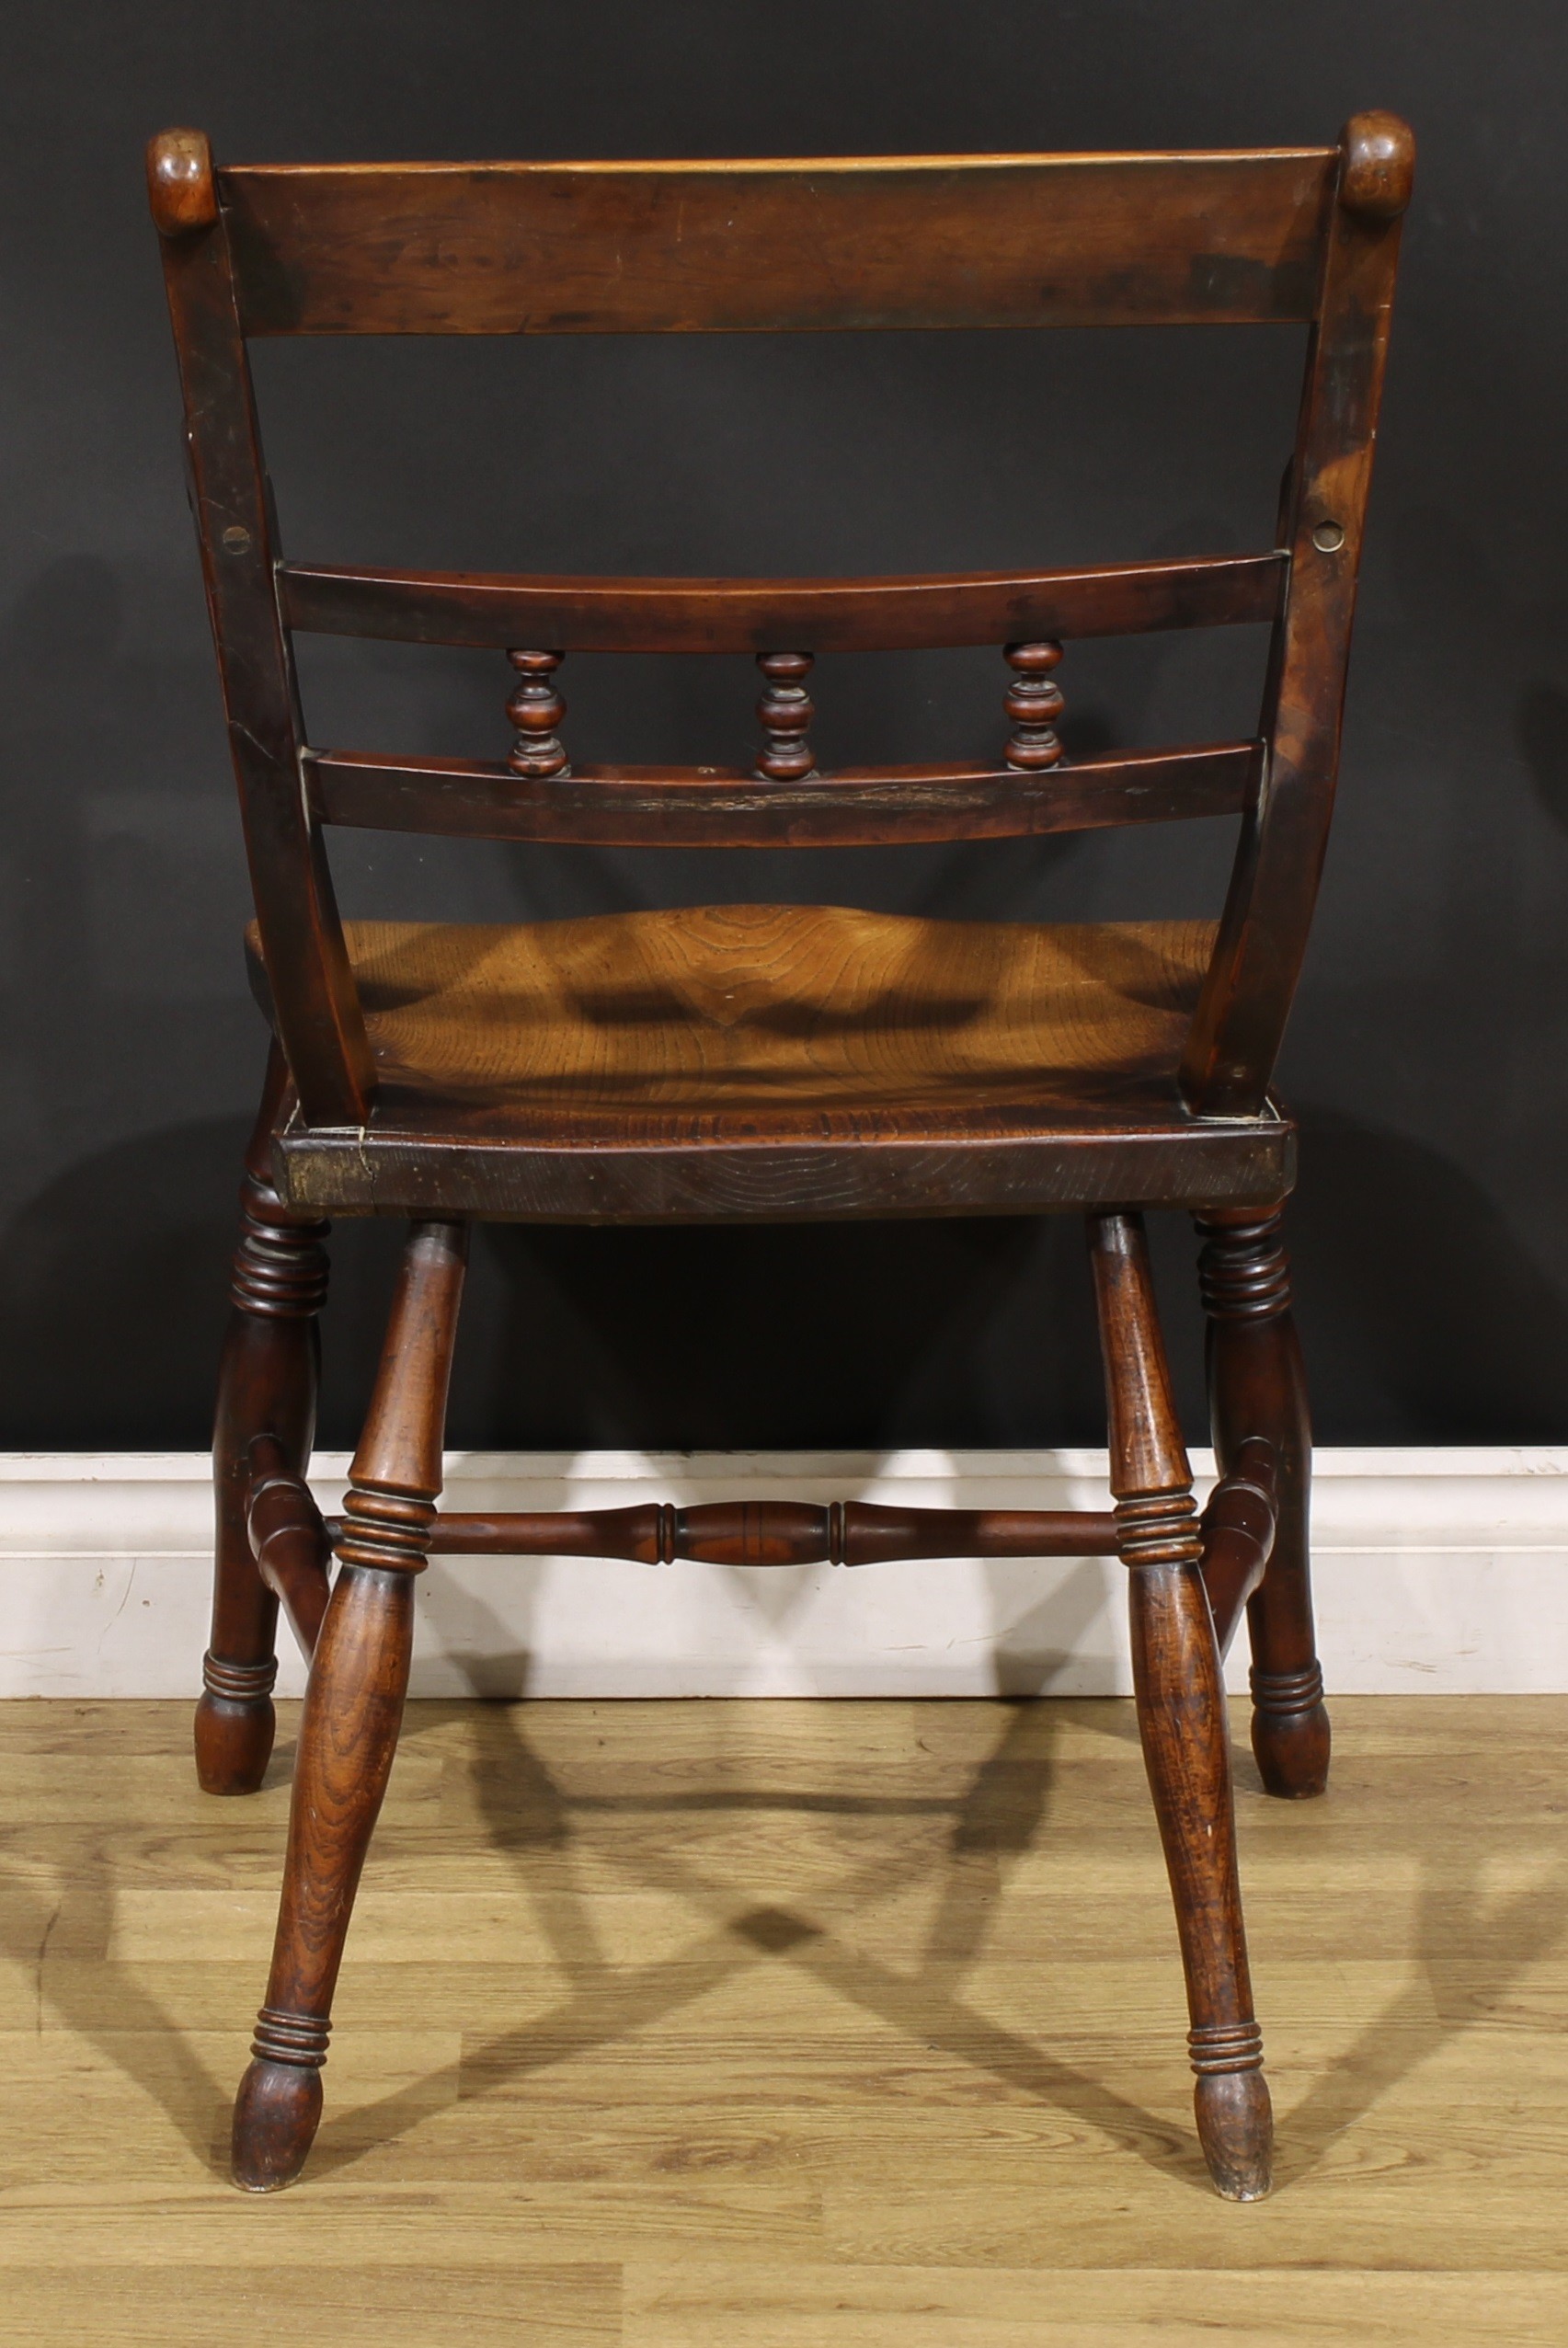 An early 19th century yew and elm elbow chair, saddle seat, turned legs, H-stretcher, 86cm high, - Image 4 of 4